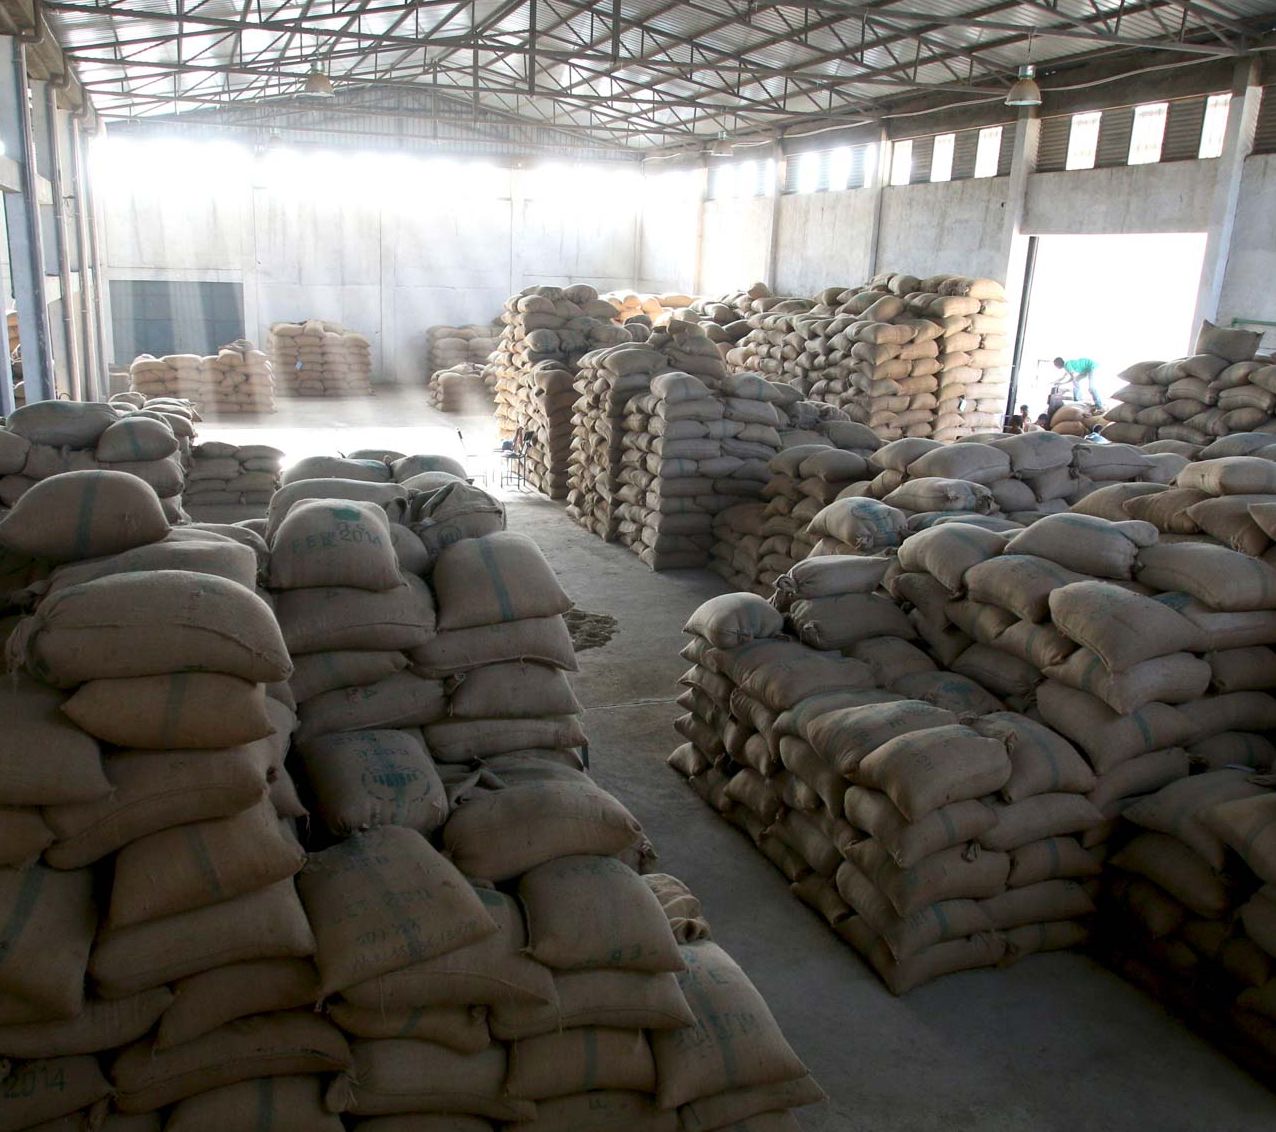 Warehouse of burlap coffee bags at coffee farm with golden rays of sunshine.